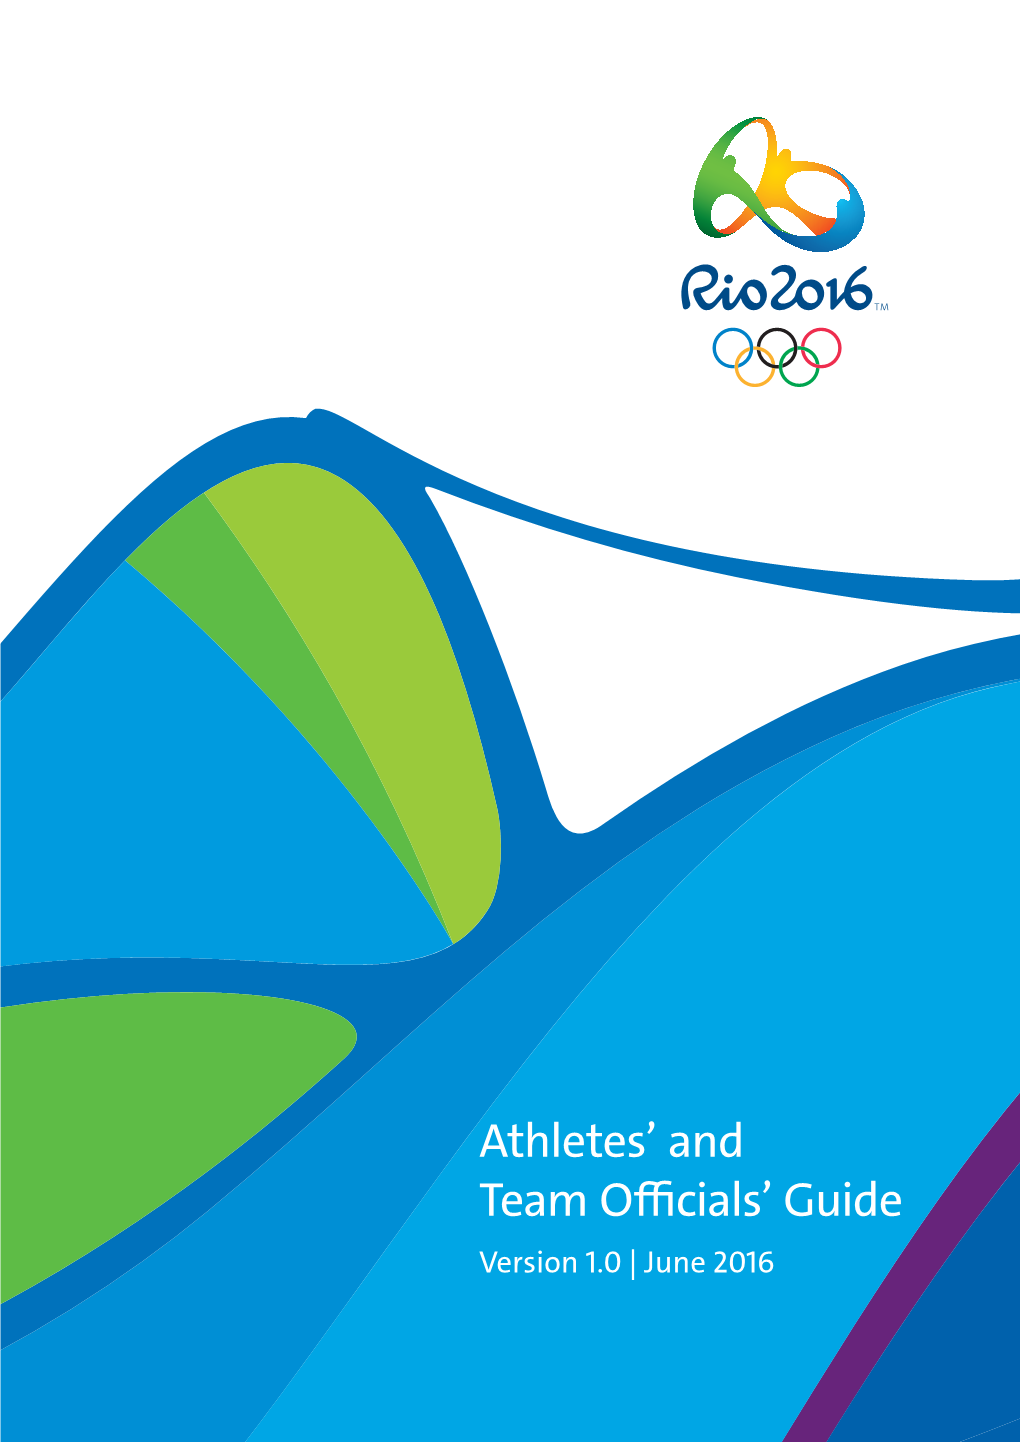 Athletes' and Team Officials' Guide